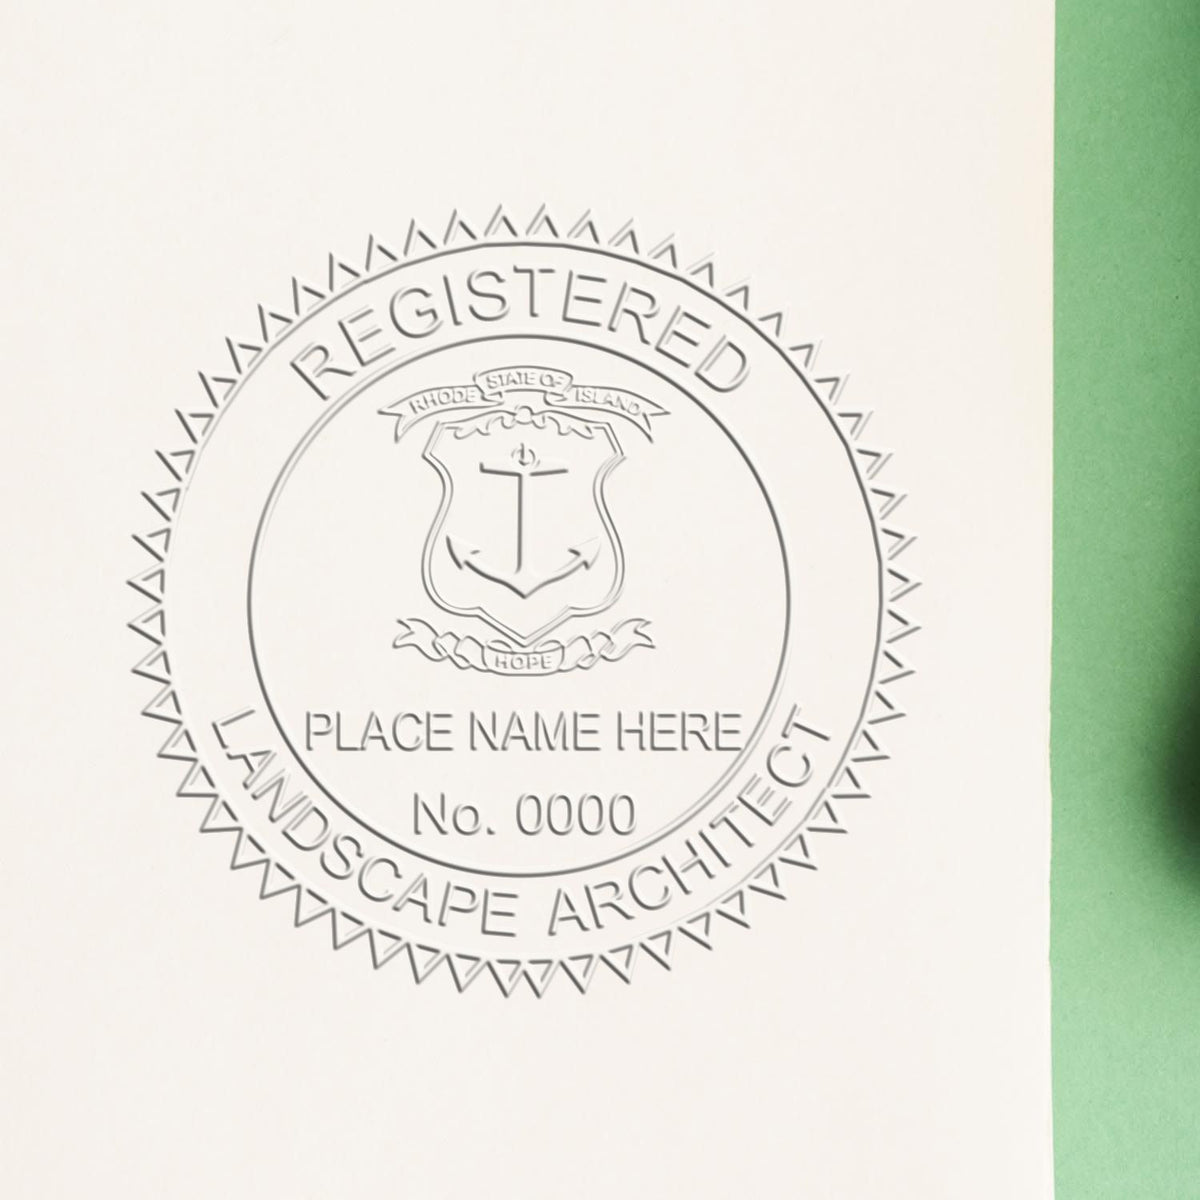 A stamped imprint of the Gift Rhode Island Landscape Architect Seal in this stylish lifestyle photo, setting the tone for a unique and personalized product.